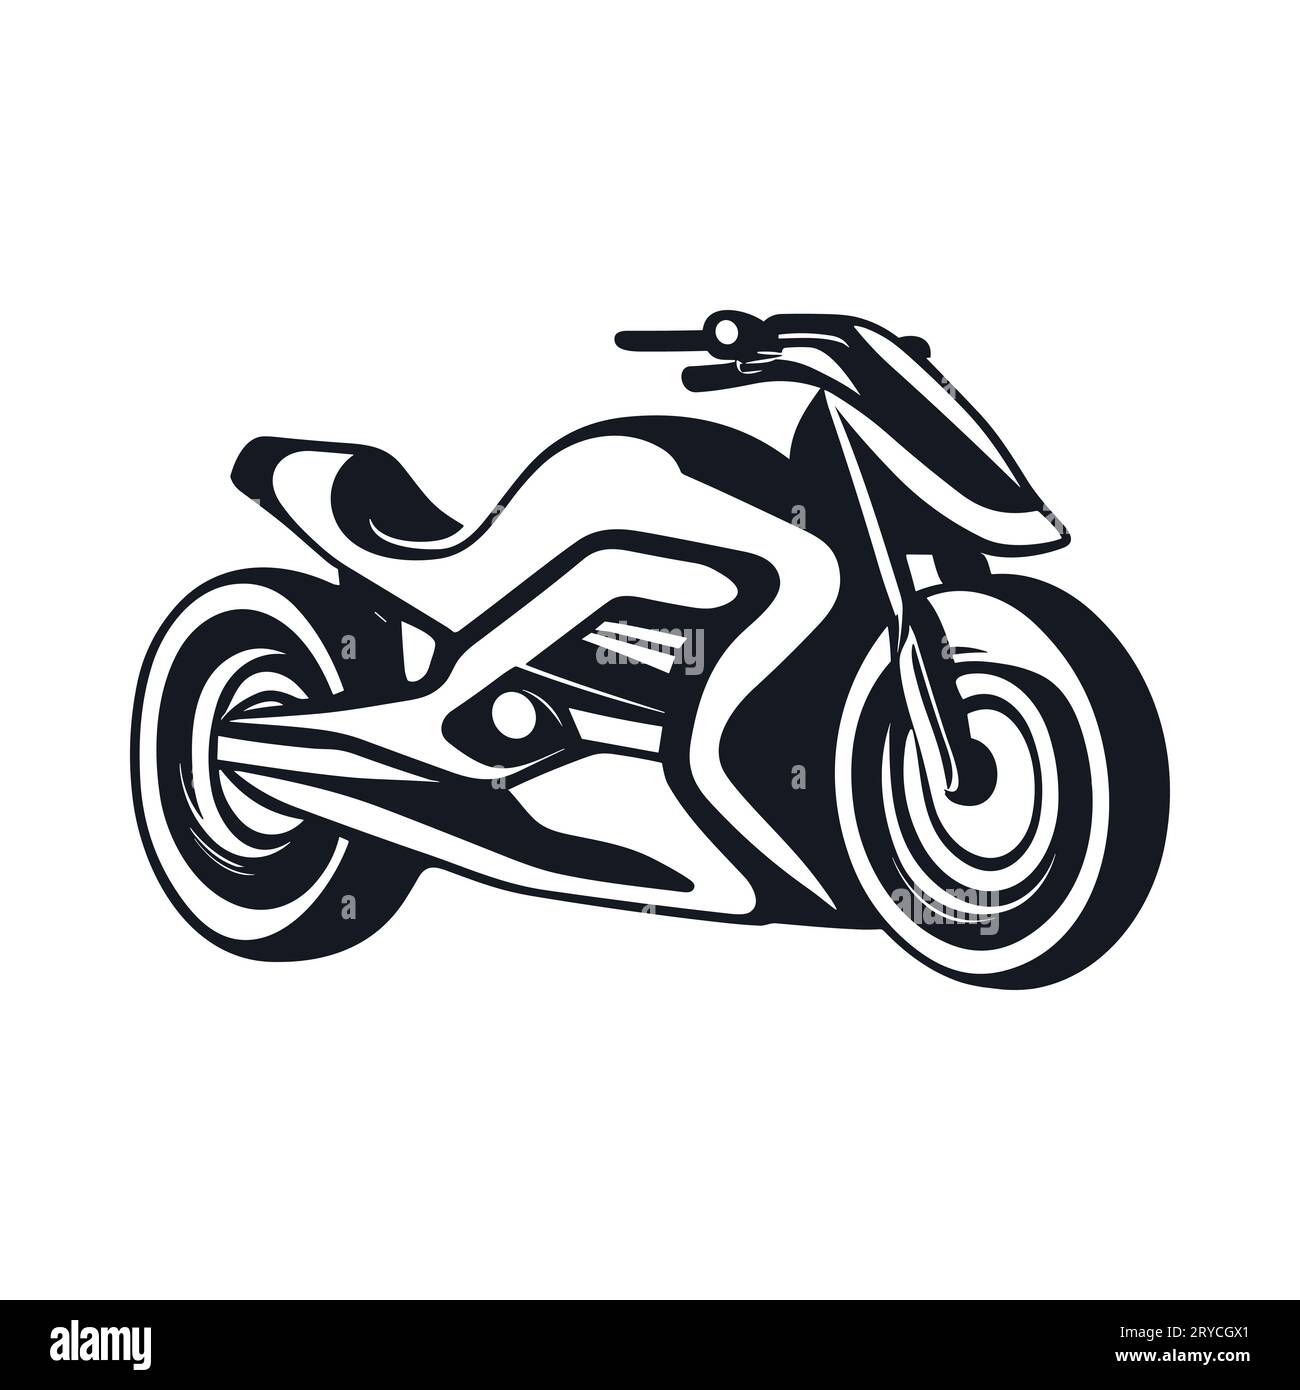 Road motorcycle with rider, abstract vector silhouette, motor sport logo Stock Vector